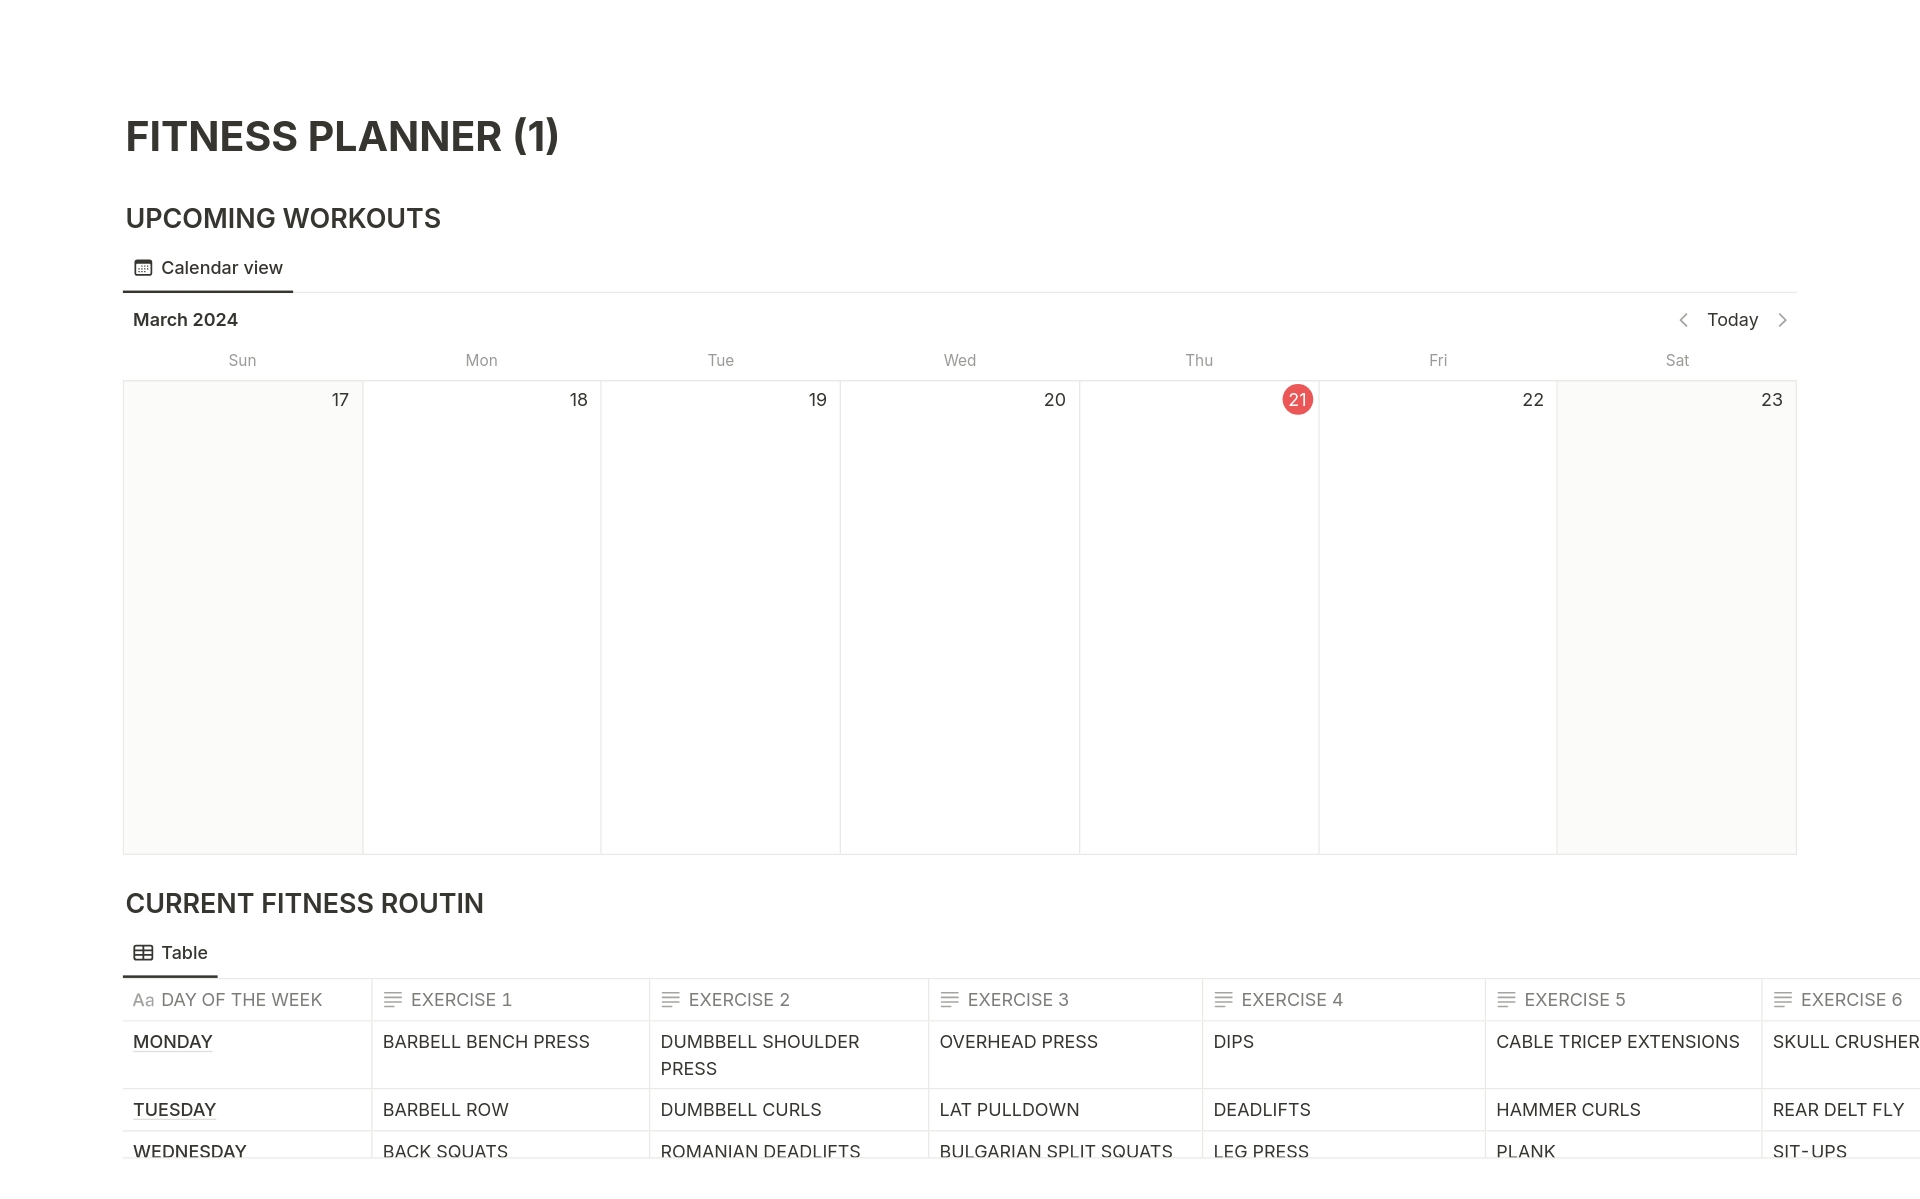 Start your fitness journey with our straightforward and useful Notion fitness planner. This planner contains a current workout routine table, workout tracker, calendar to plan workouts and more!